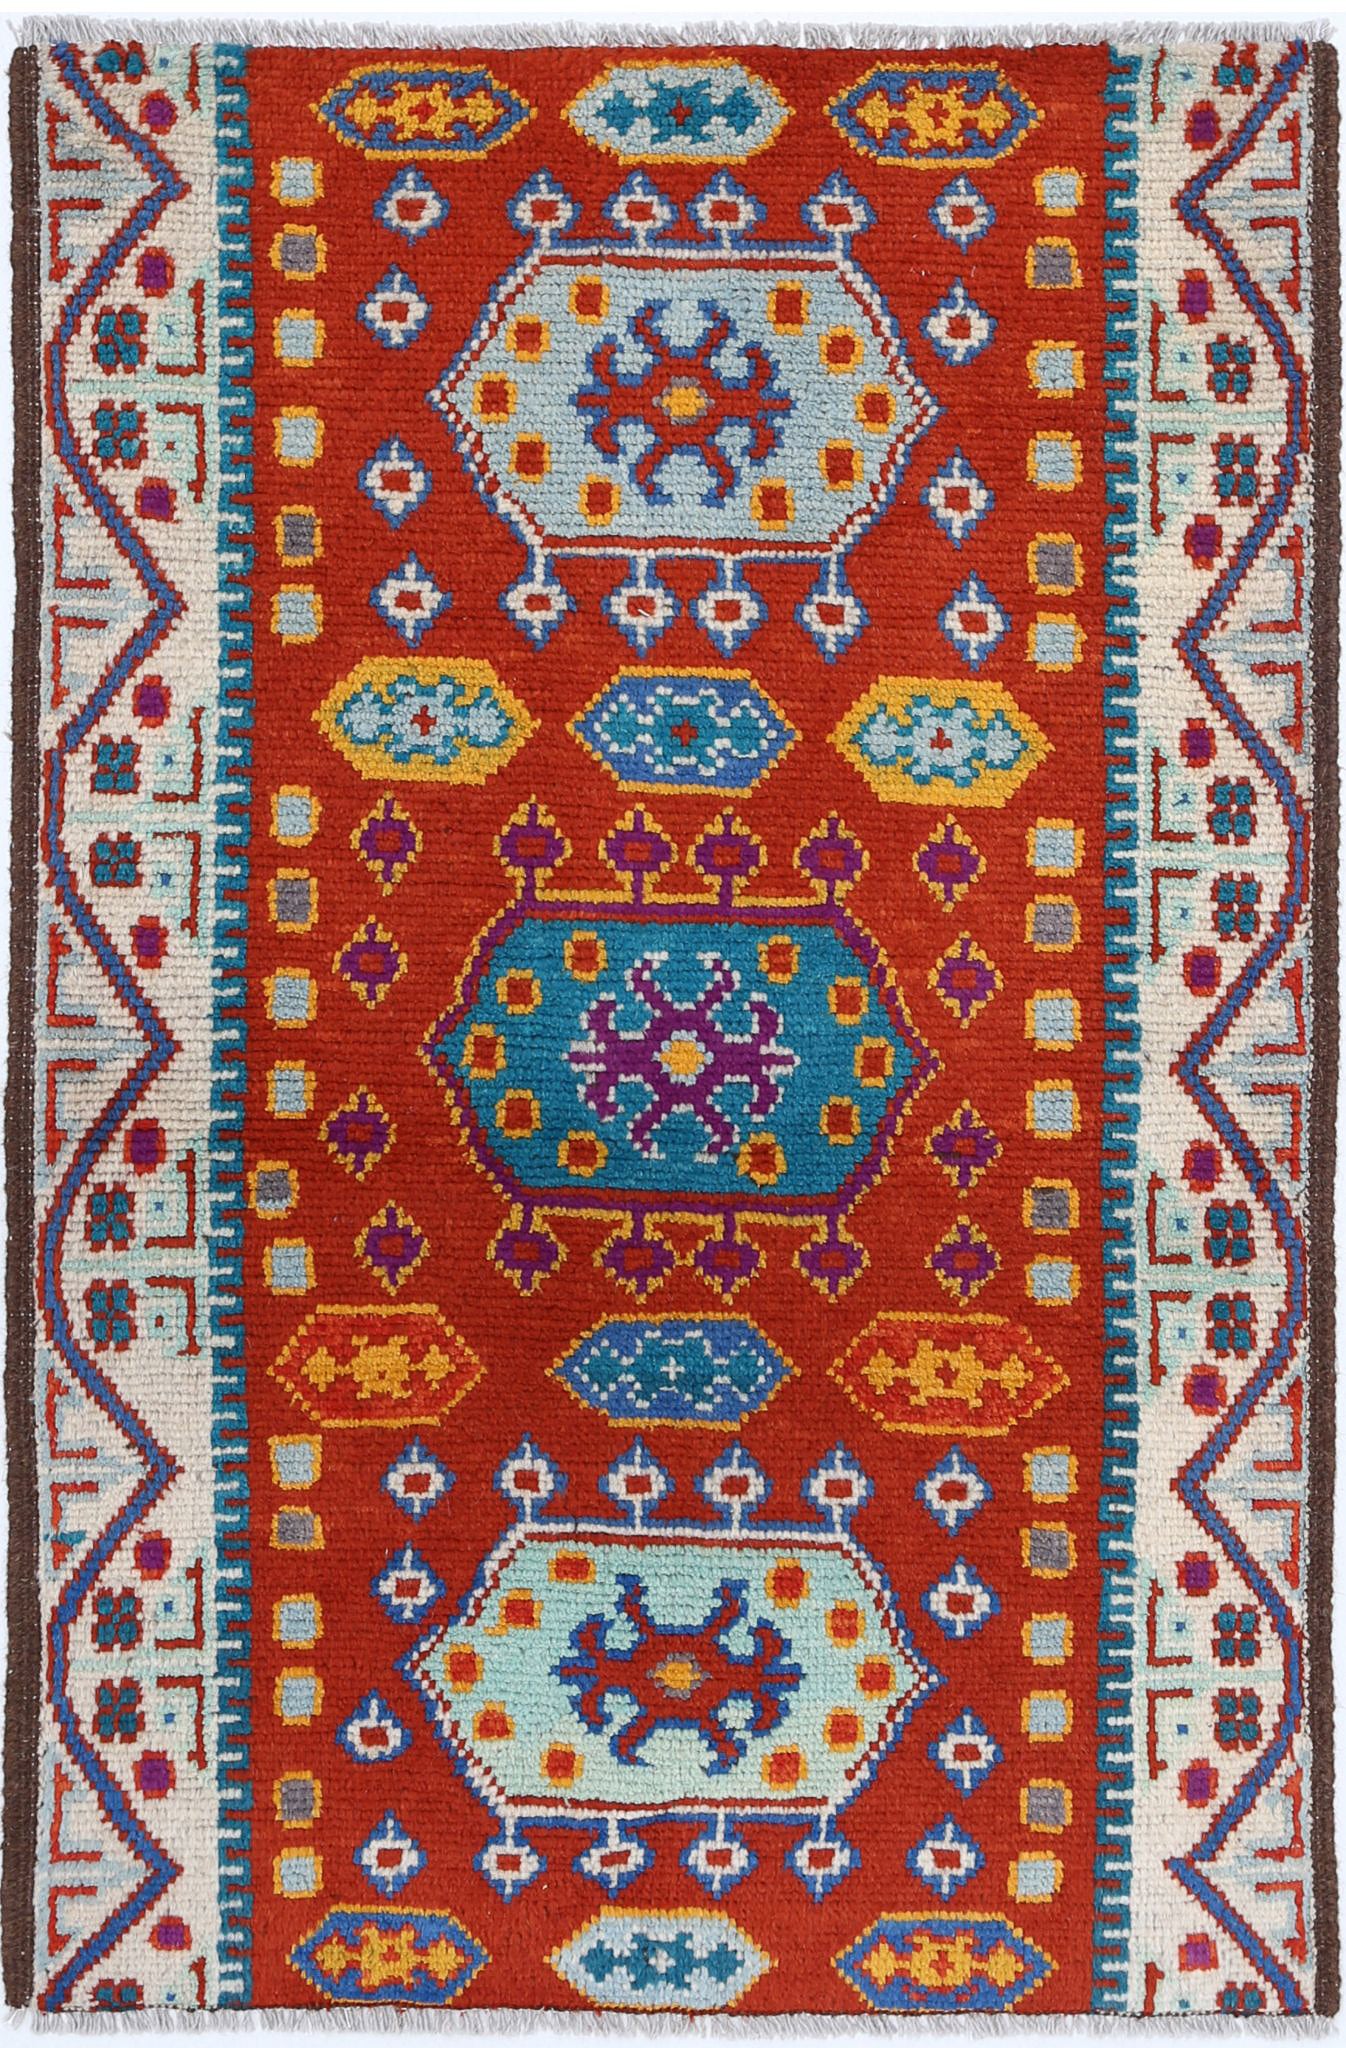 Revival-hand-knotted-qarghani-wool-rug-5014188.jpg